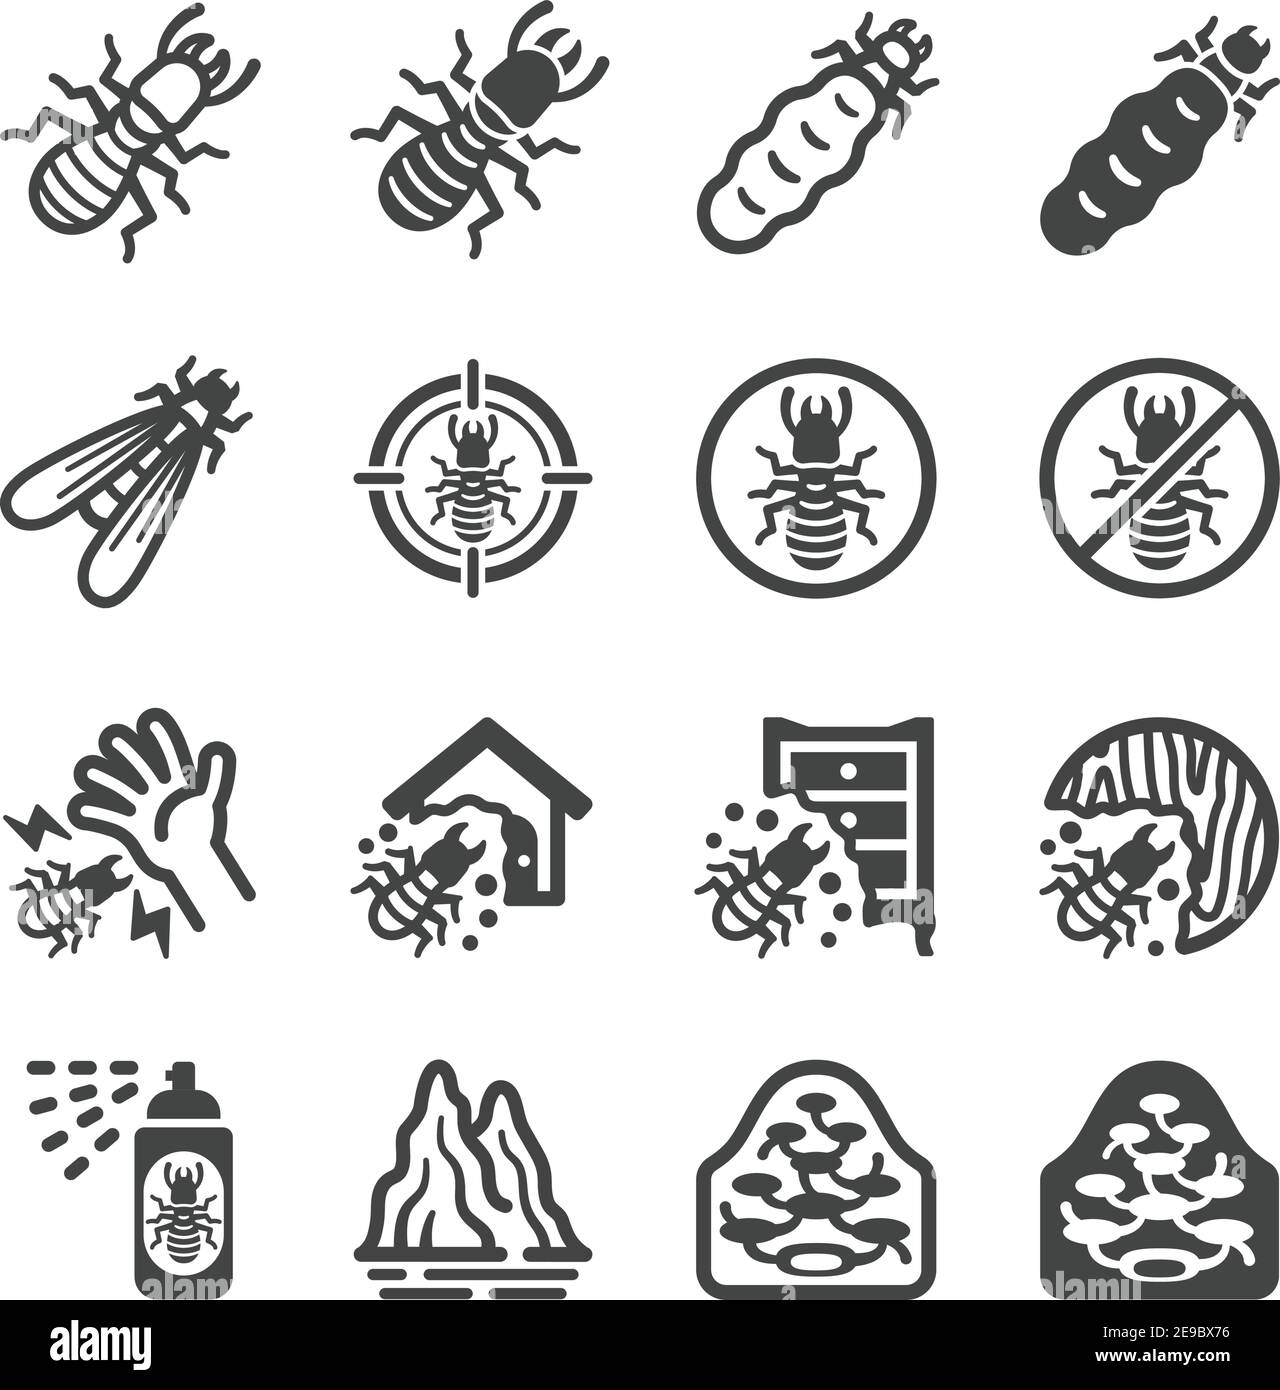 termite icon set,insect and pest icon,vector and illustration Stock Vector